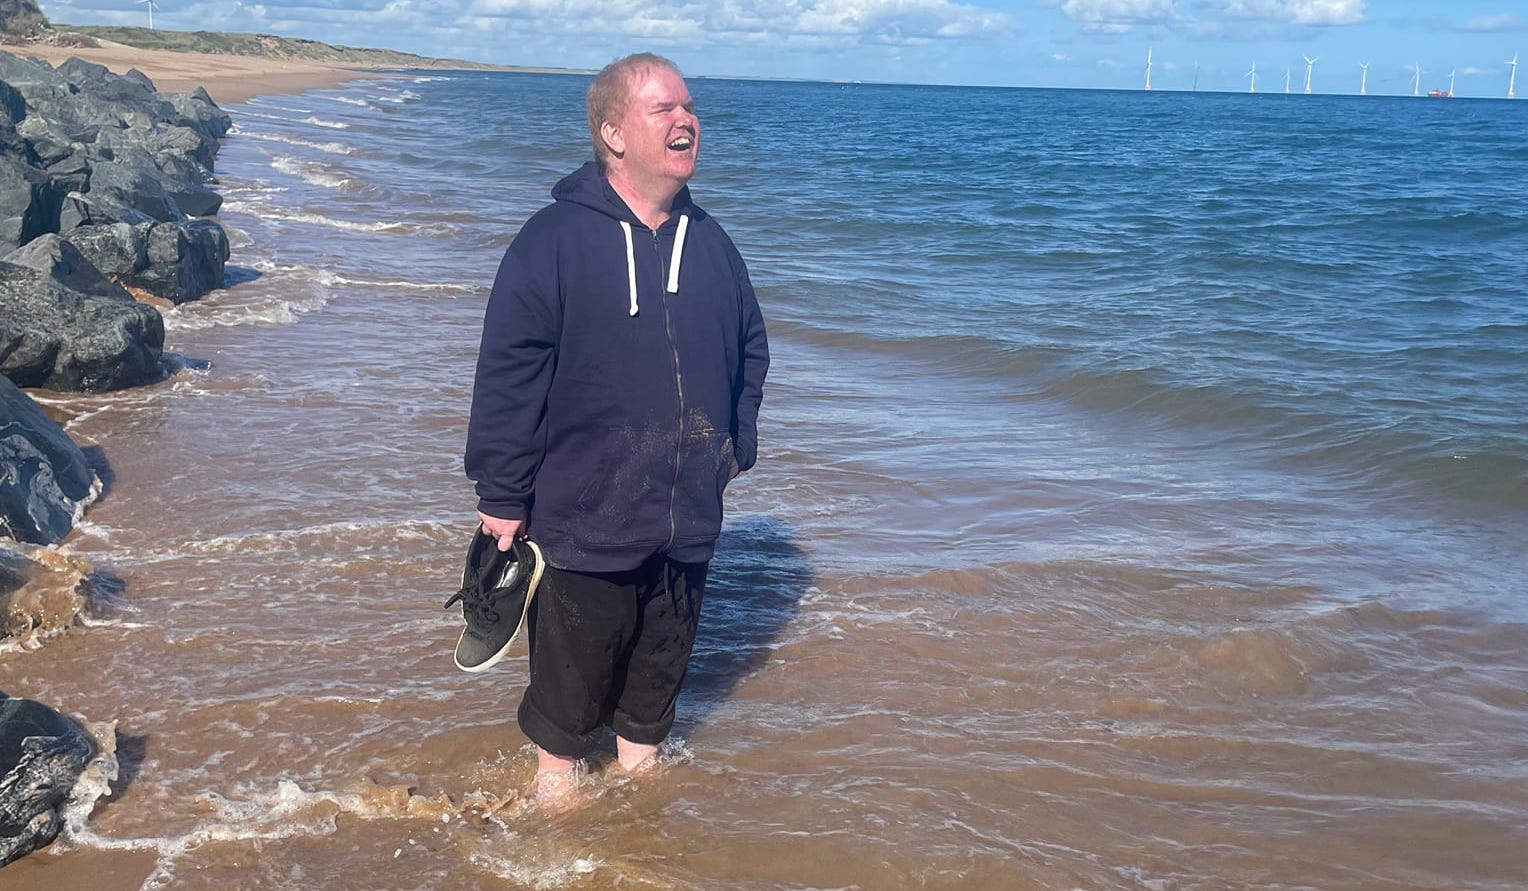 Andrew standing in the sea in Scotland grinning